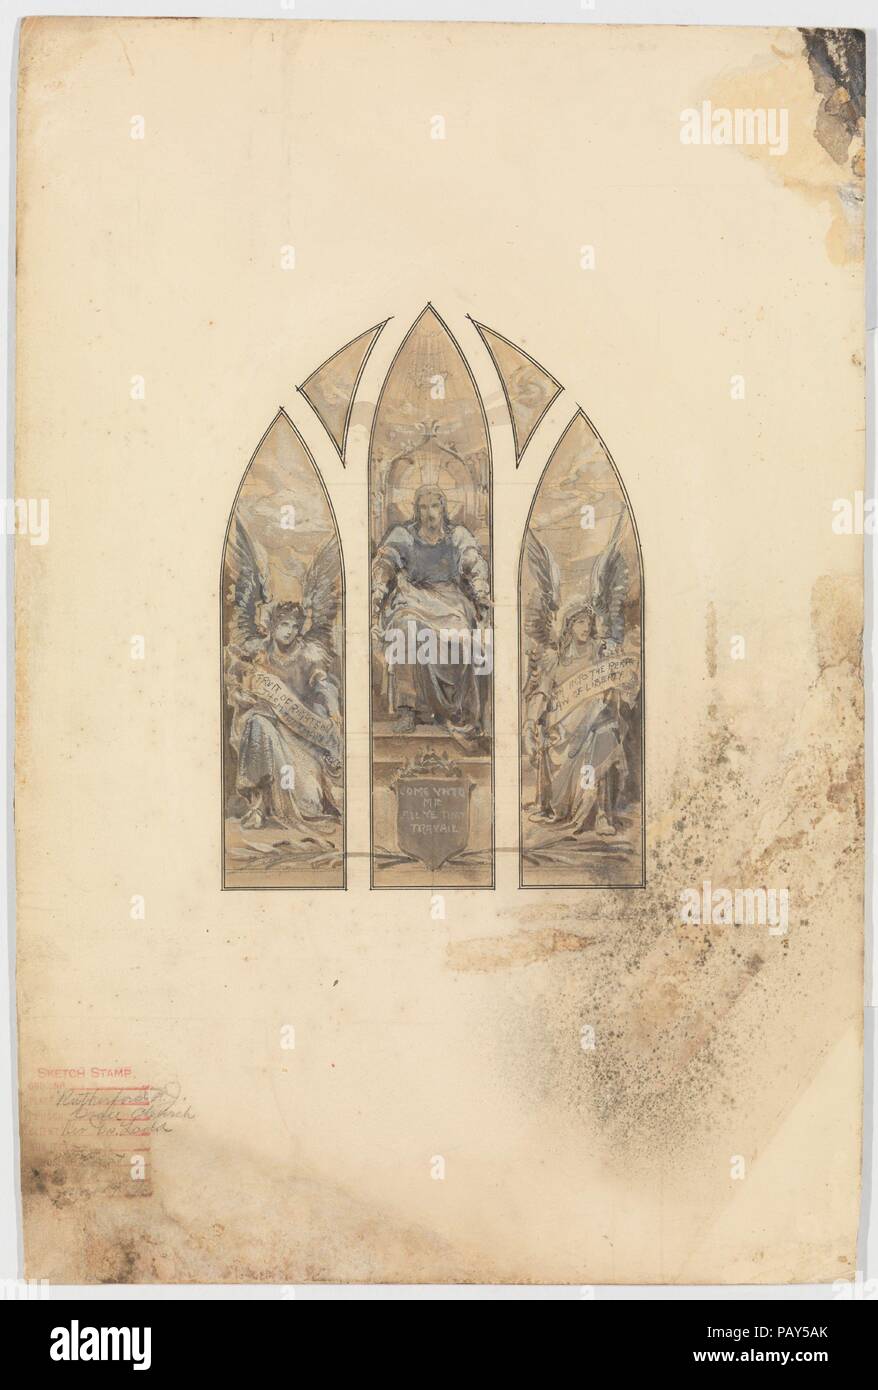 Design for three lancet window. Culture: American. Dimensions: Overall: 20 7/16 x 13 3/4 in. (51.9 x 34.9 cm)  Design: 9 1/2 x 6 13/16 in. (24.1 x 17.3 cm). Maker: Possibly Tiffany Glass and Decorating Company (American, 1892-1902); Possibly Tiffany Studios (1902-32); Probably Frederick Wilson (American (born Ireland) Dublin 1858-1932 Los Angeles, California). Date: 1919. Museum: Metropolitan Museum of Art, New York, USA. Stock Photo